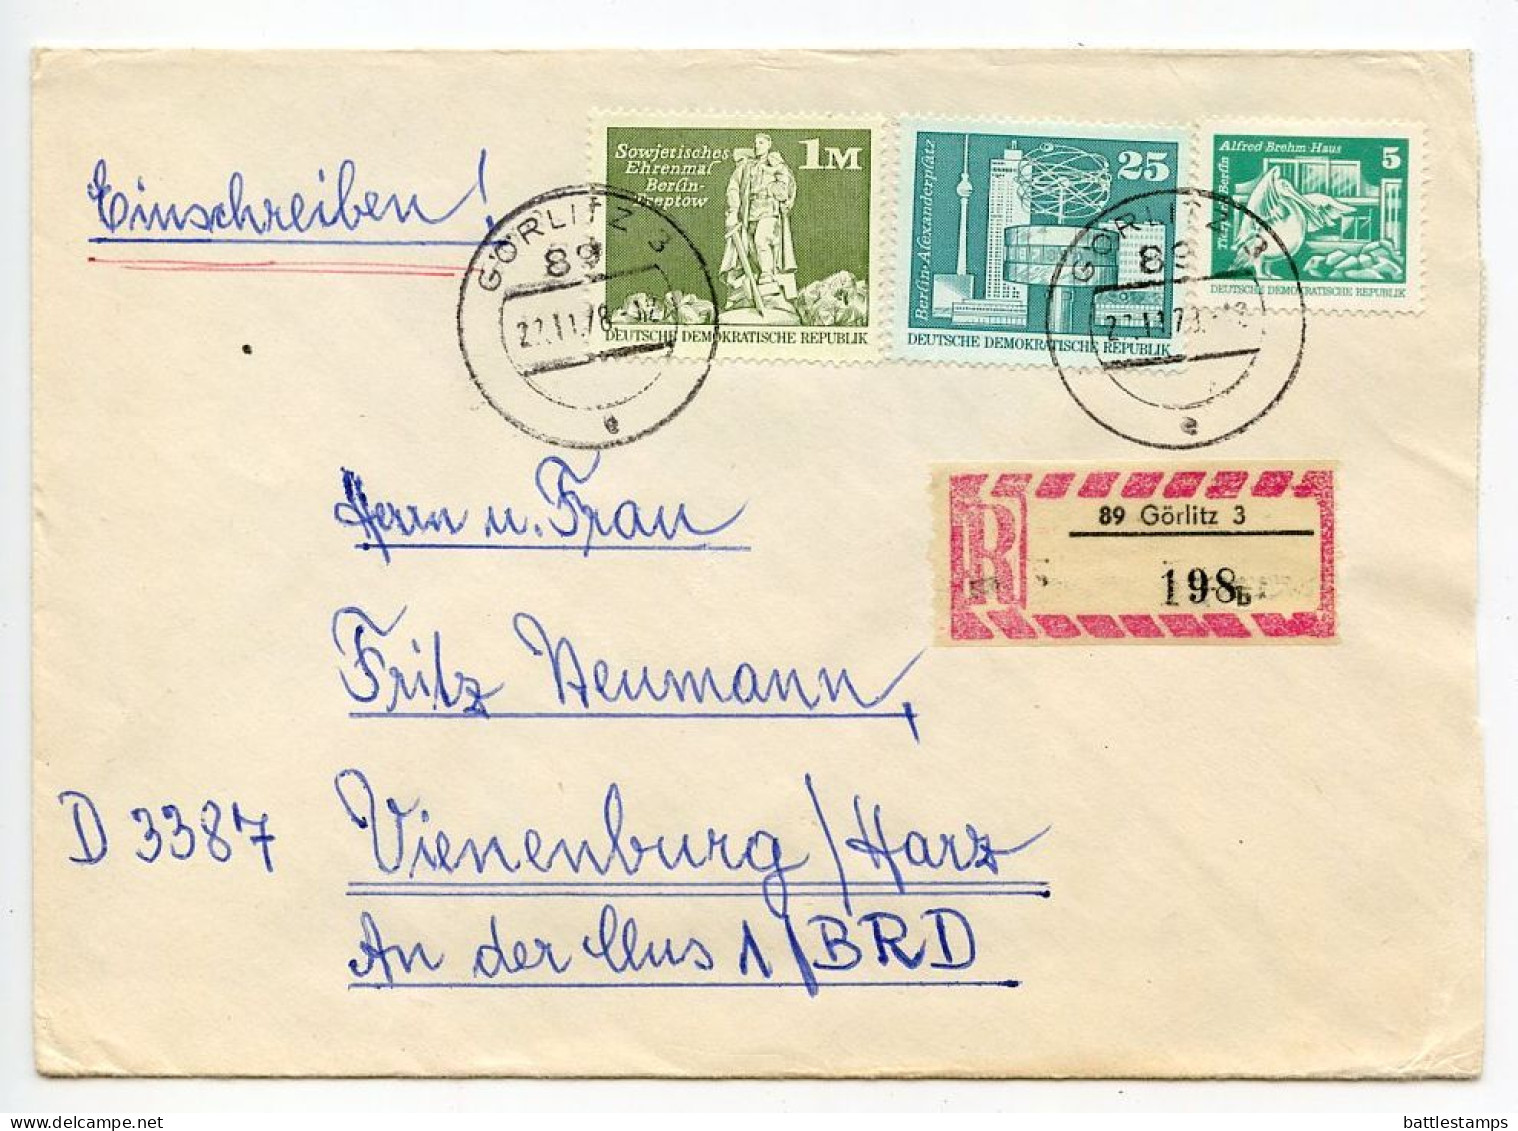 Germany East 1978 Registered Cover; Görlitz To Vienenburg; Mix Of Stamps; Tauschsendung Exchange Control Label - Lettres & Documents